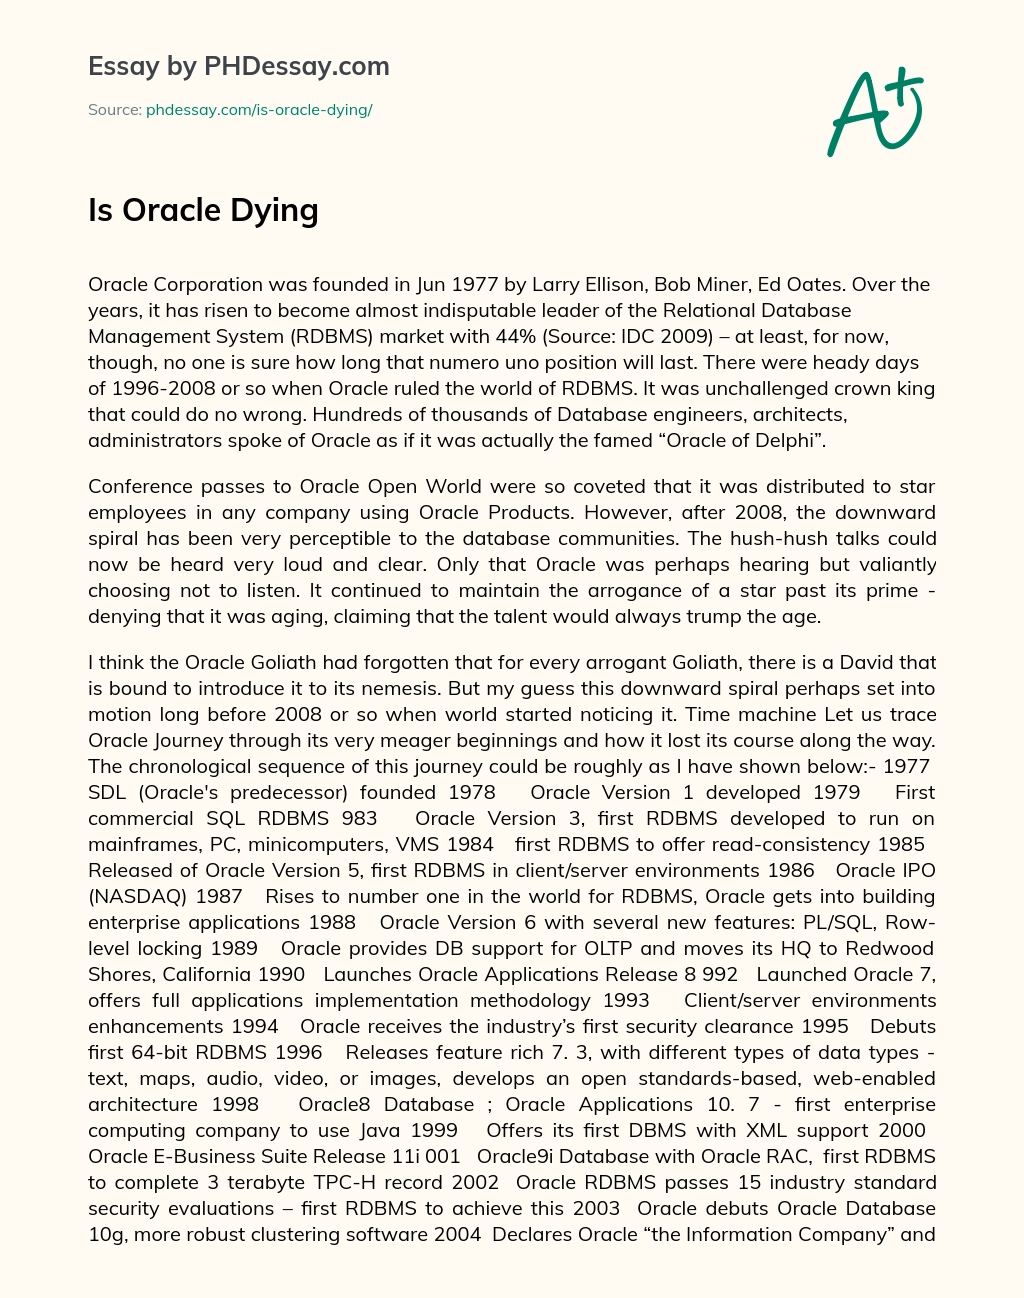 Is Oracle Dying essay